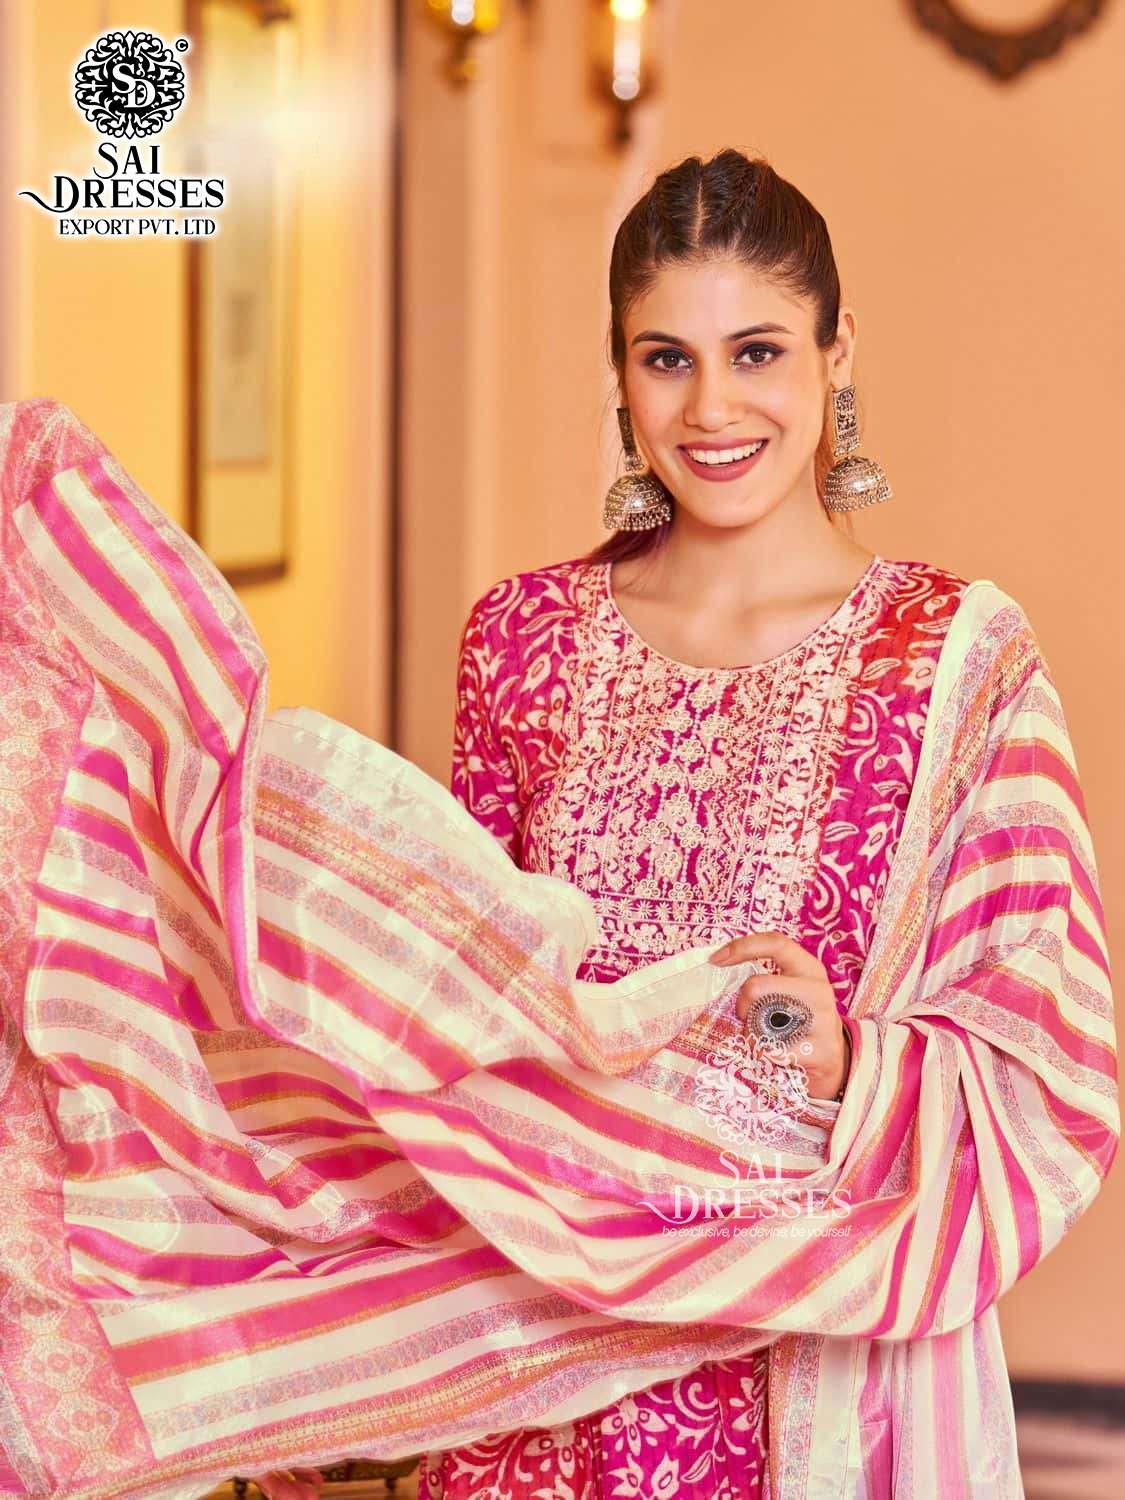 SAI DRESSES PRESENT ANERI READY TO FESTIVE WEAR FANCY NAIRA CUT WITH PANT STYLE 3 PIECE SUITS IN WHOLESALE RATE IN SURAT